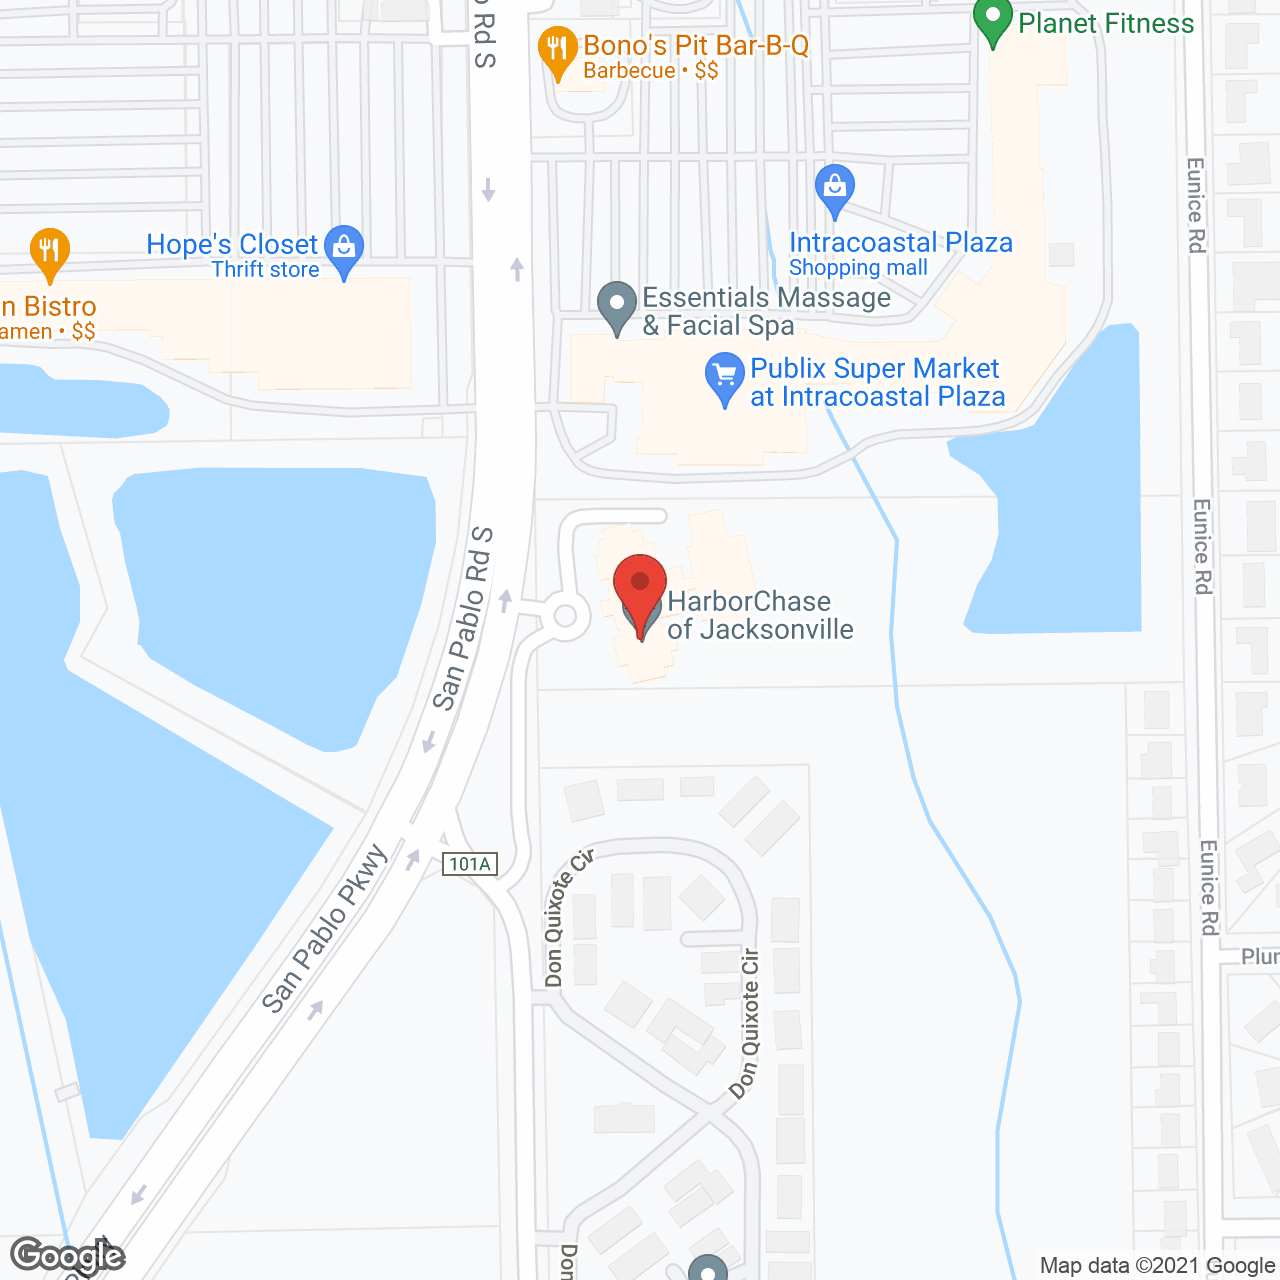 HarborChase of Jacksonville in google map